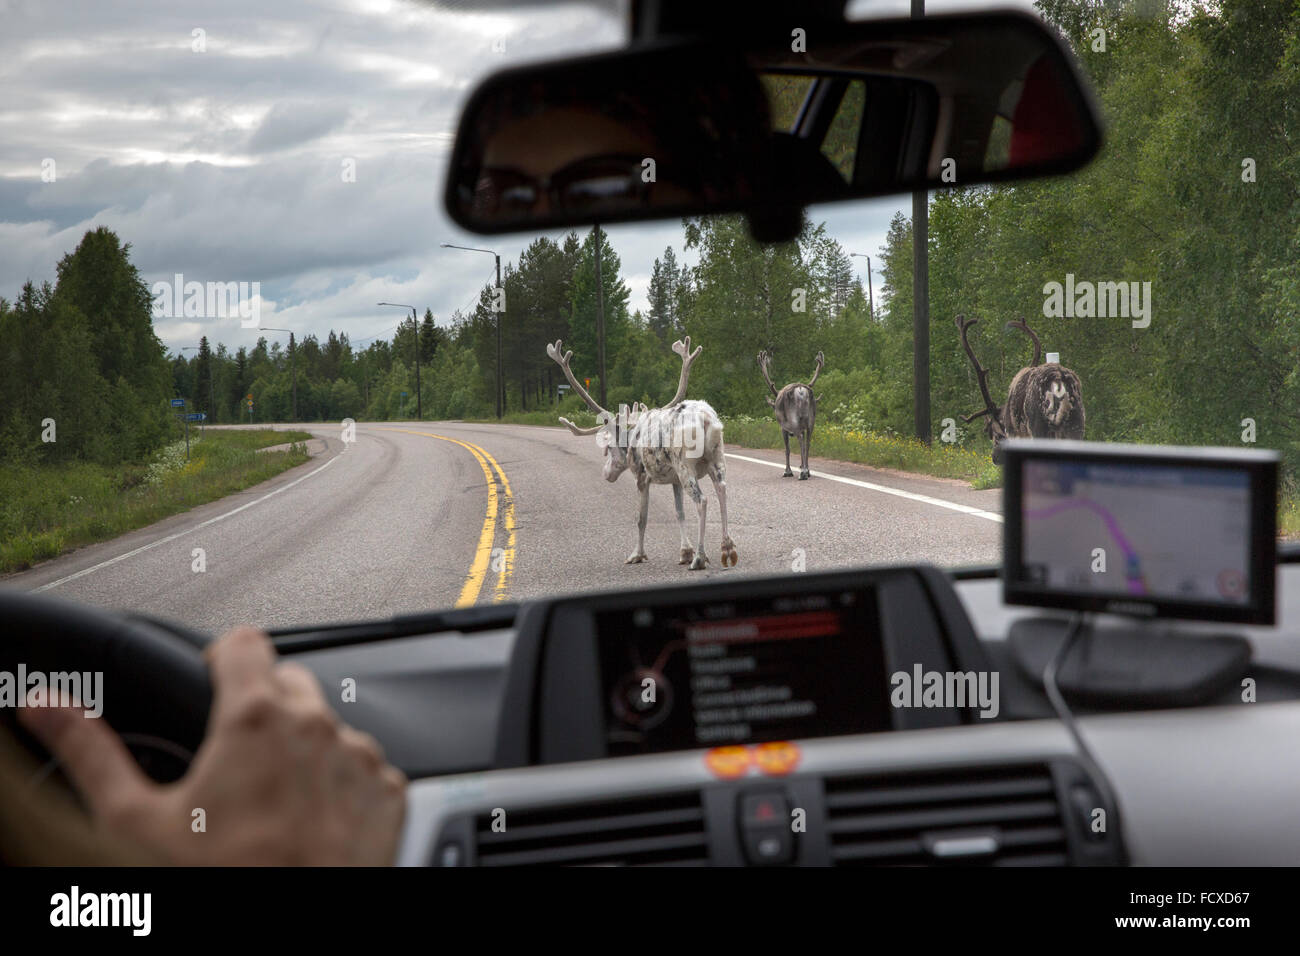 Reindeer north of the arctic circle on the highway in Lapland Province, Finland Stock Photo